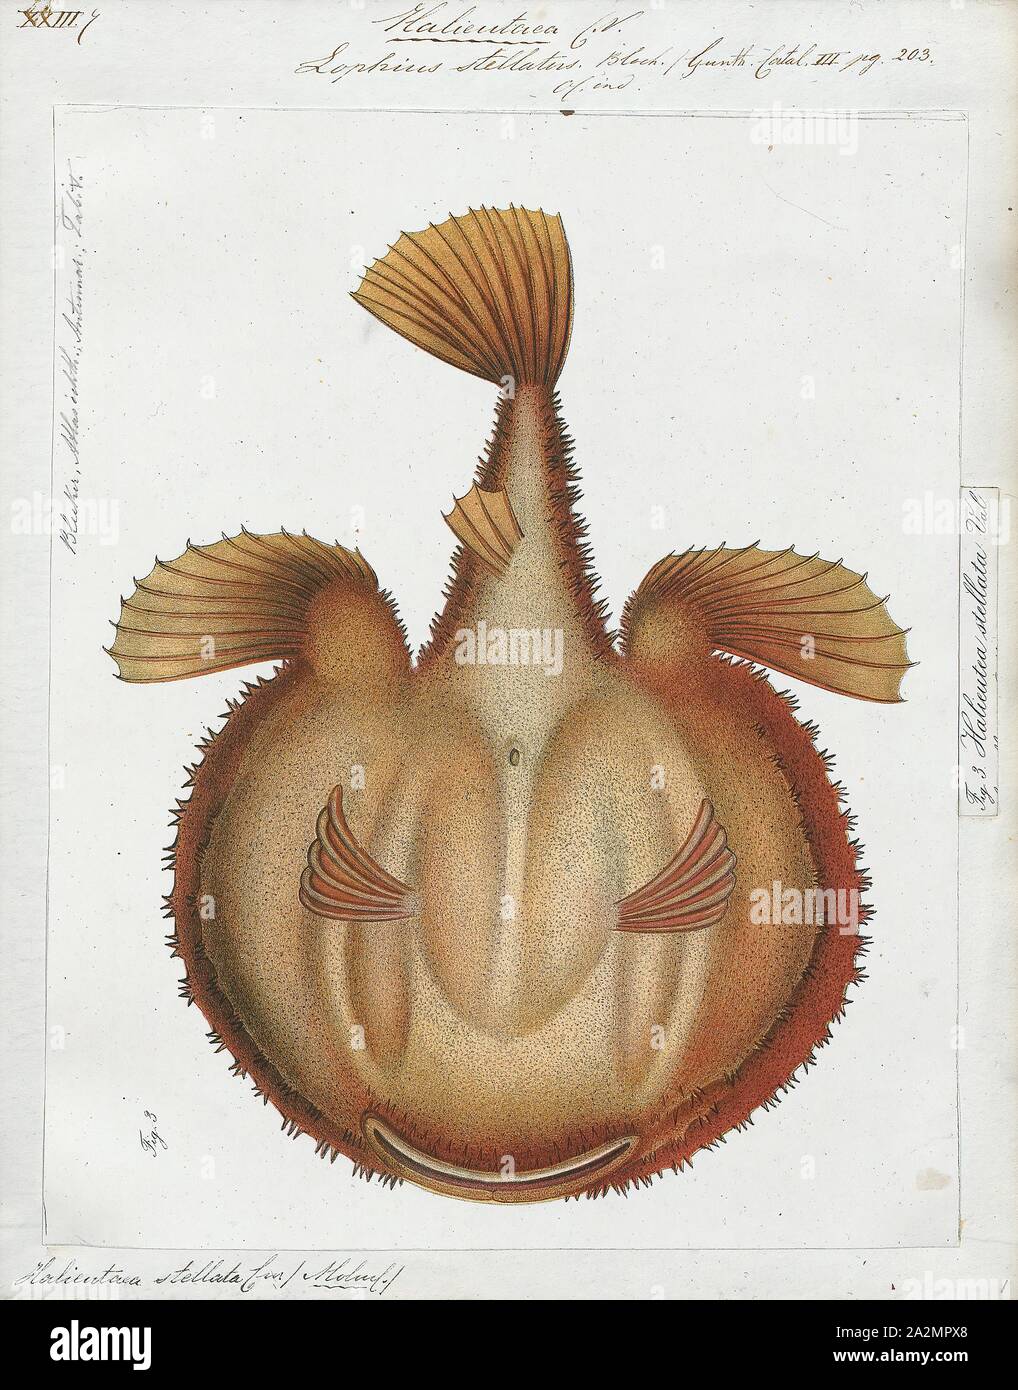 Halieutaea stellata, Print, The starry handfish, Halieutaea stellata, is a batfish of the family Ogcocephalidae found on the continental shelves of the Indo-Pacific oceans at depths of between 50 and 400 m. They are up to 30 cm long., lower part Stock Photo